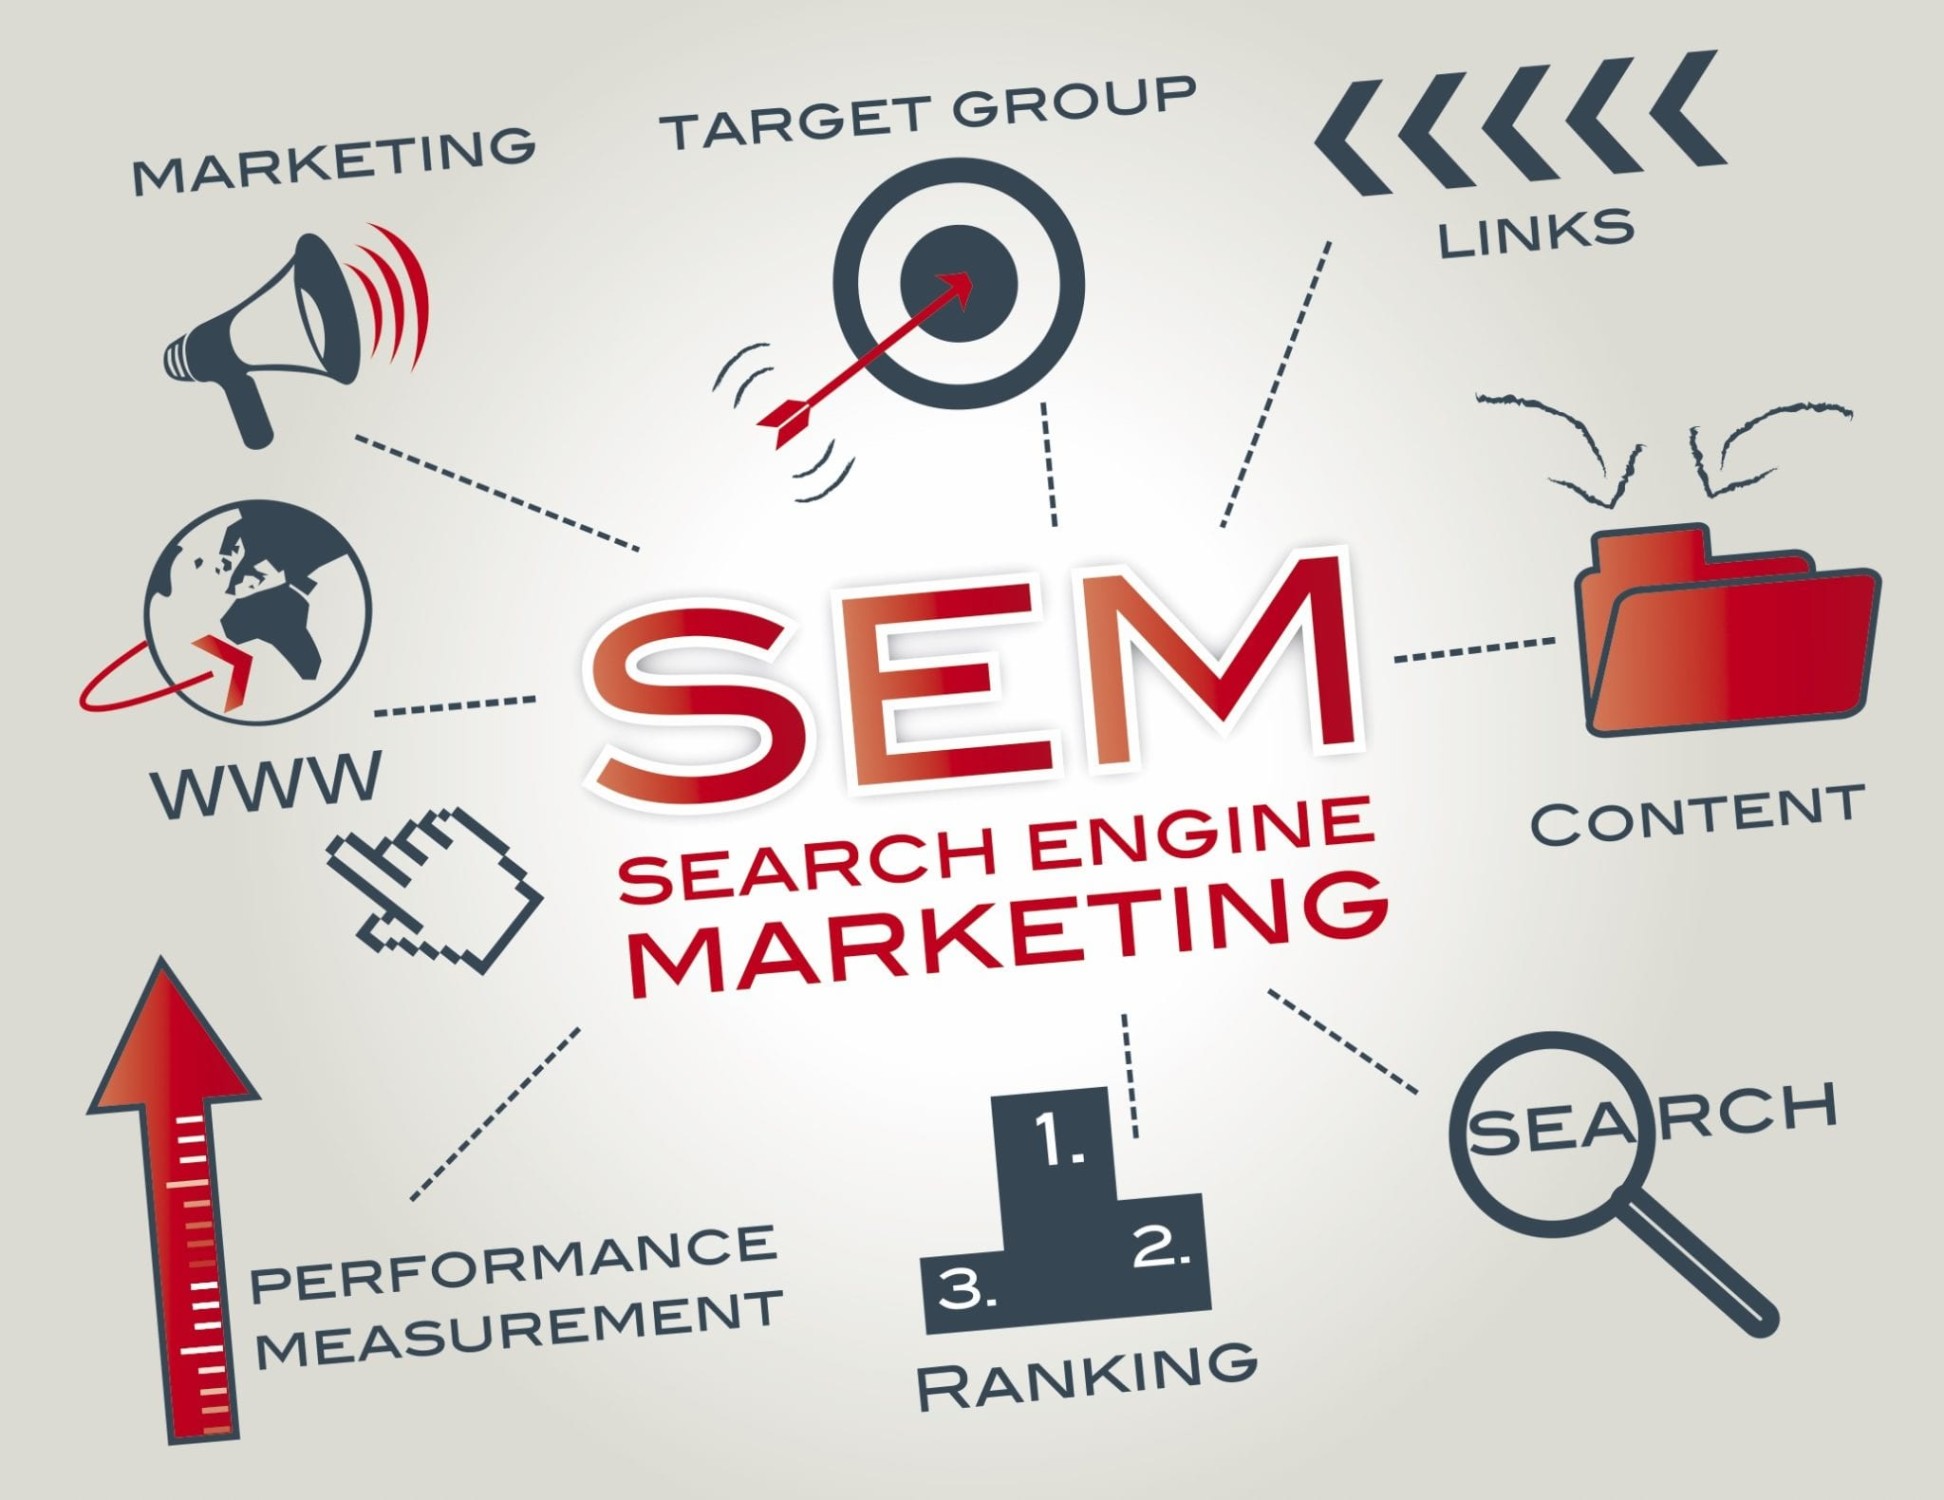 What is SEM and what are its key tools